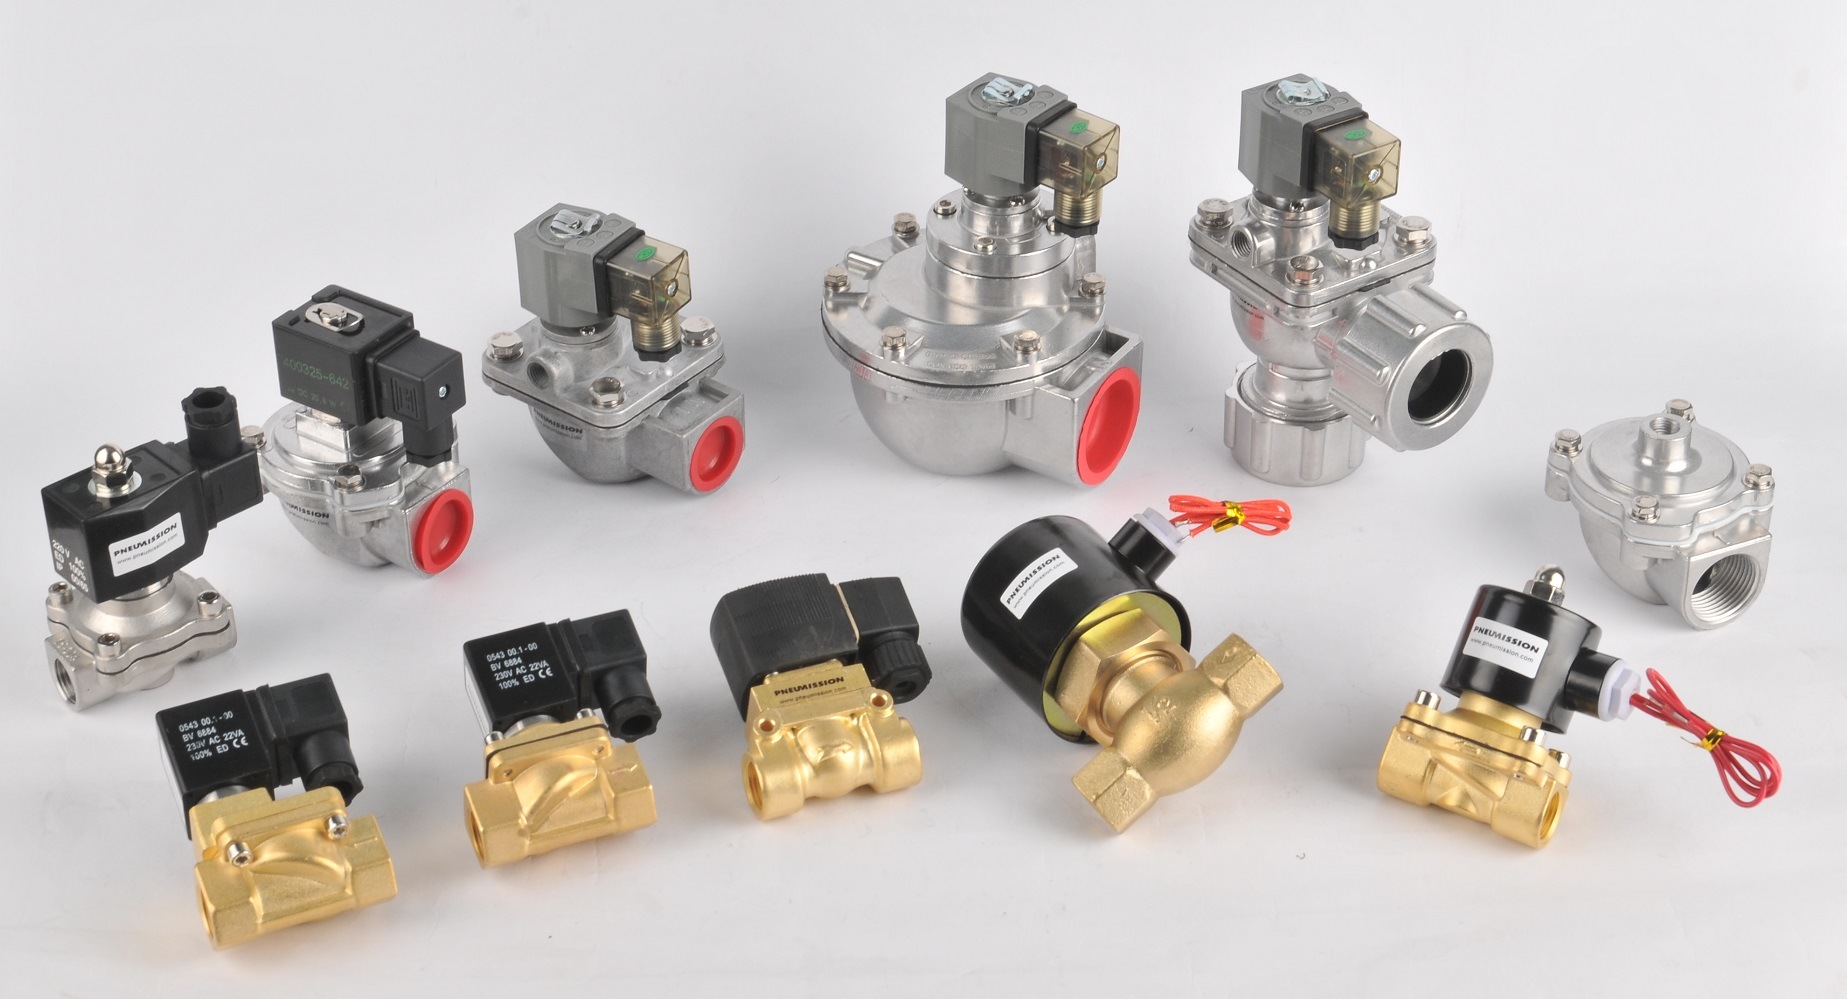 Types of Pneumatic valves